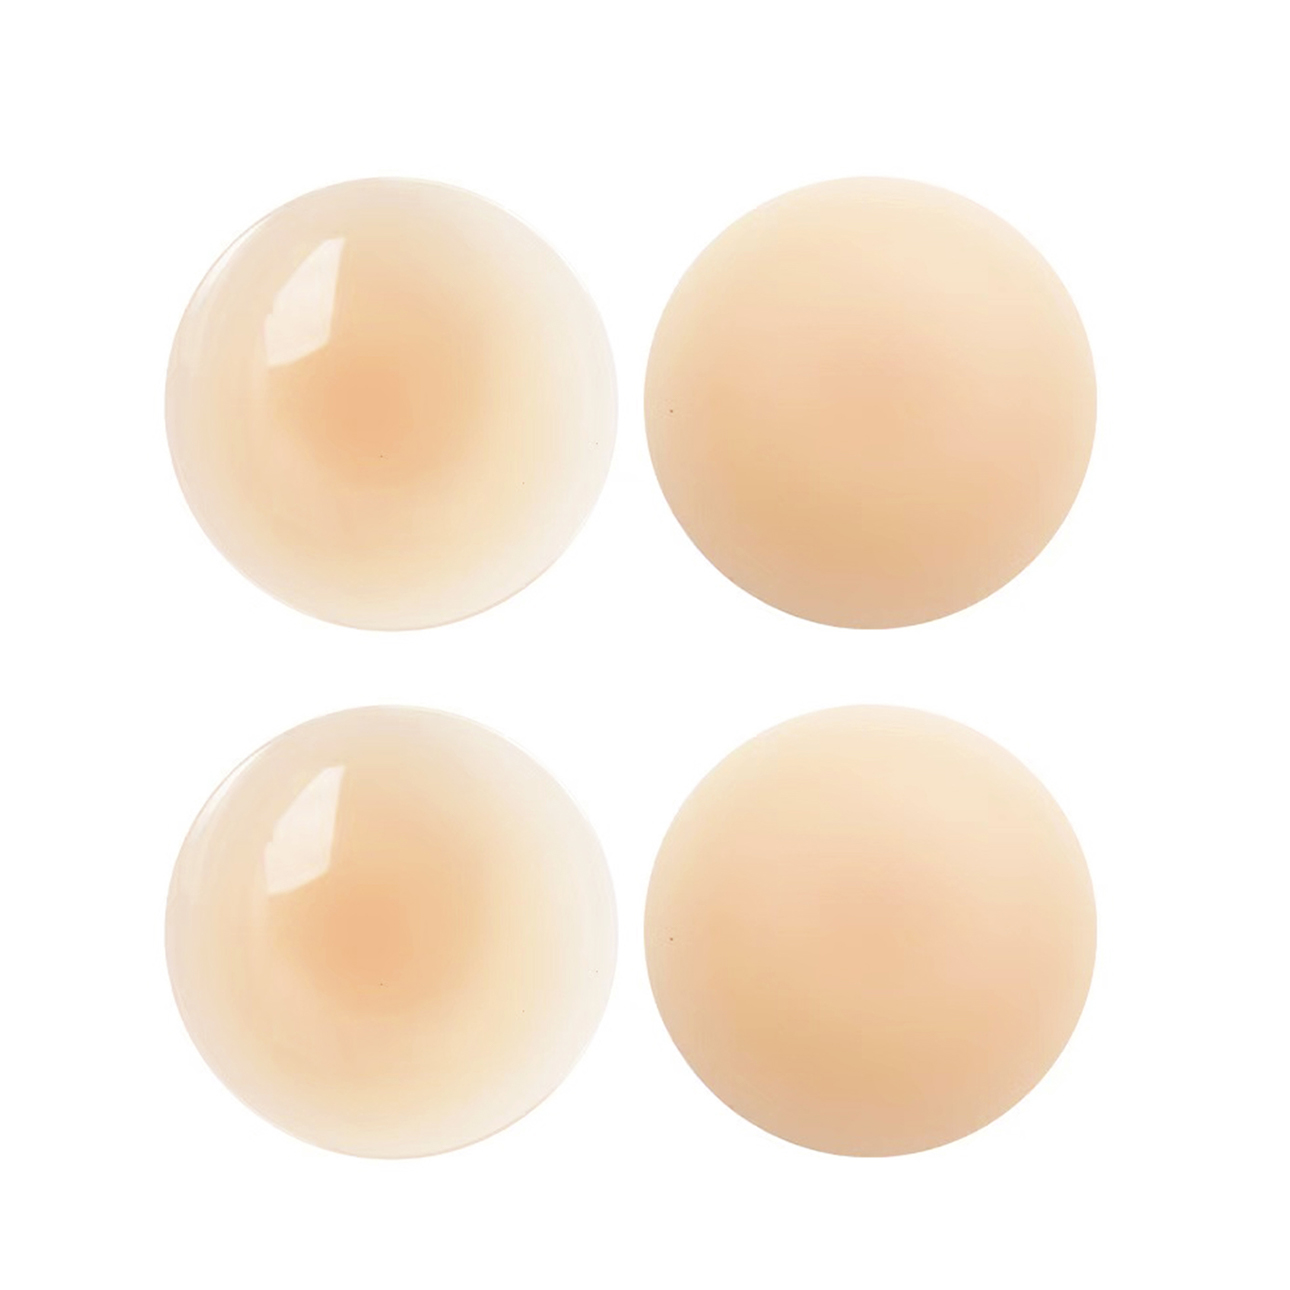 Buy Women Reusable Silicone Lift Breast Nipple Cover Bra,Thin